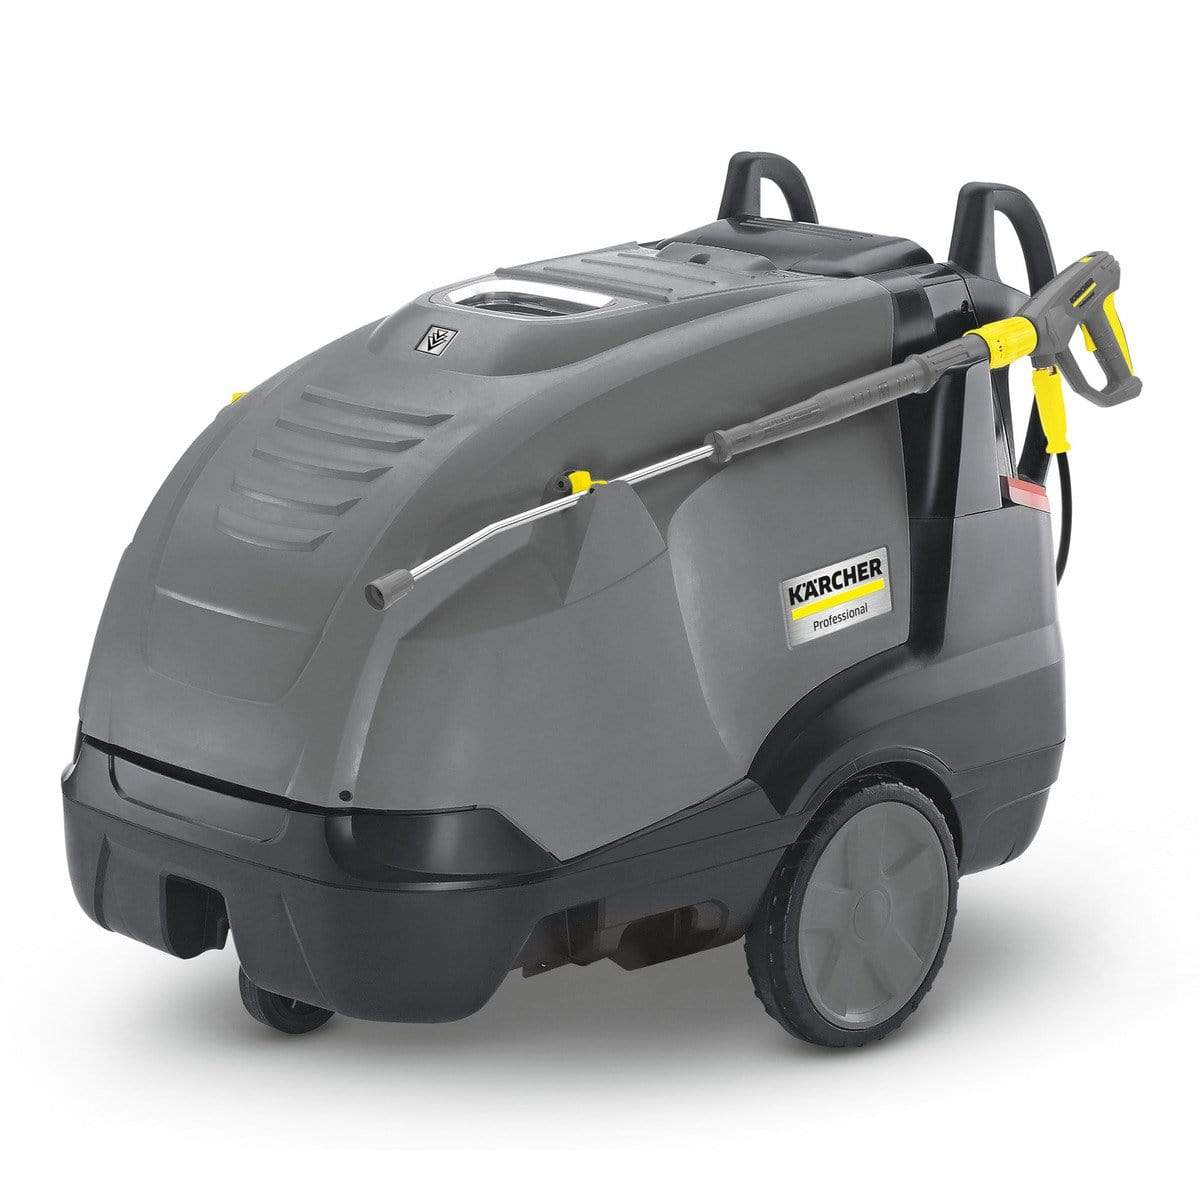 Karcher Hot and Cold High Pressure Washer 180 Bar - HDS 9/18-4 M | Supply Master | Accra, Ghana Tools Building Steel Engineering Hardware tool